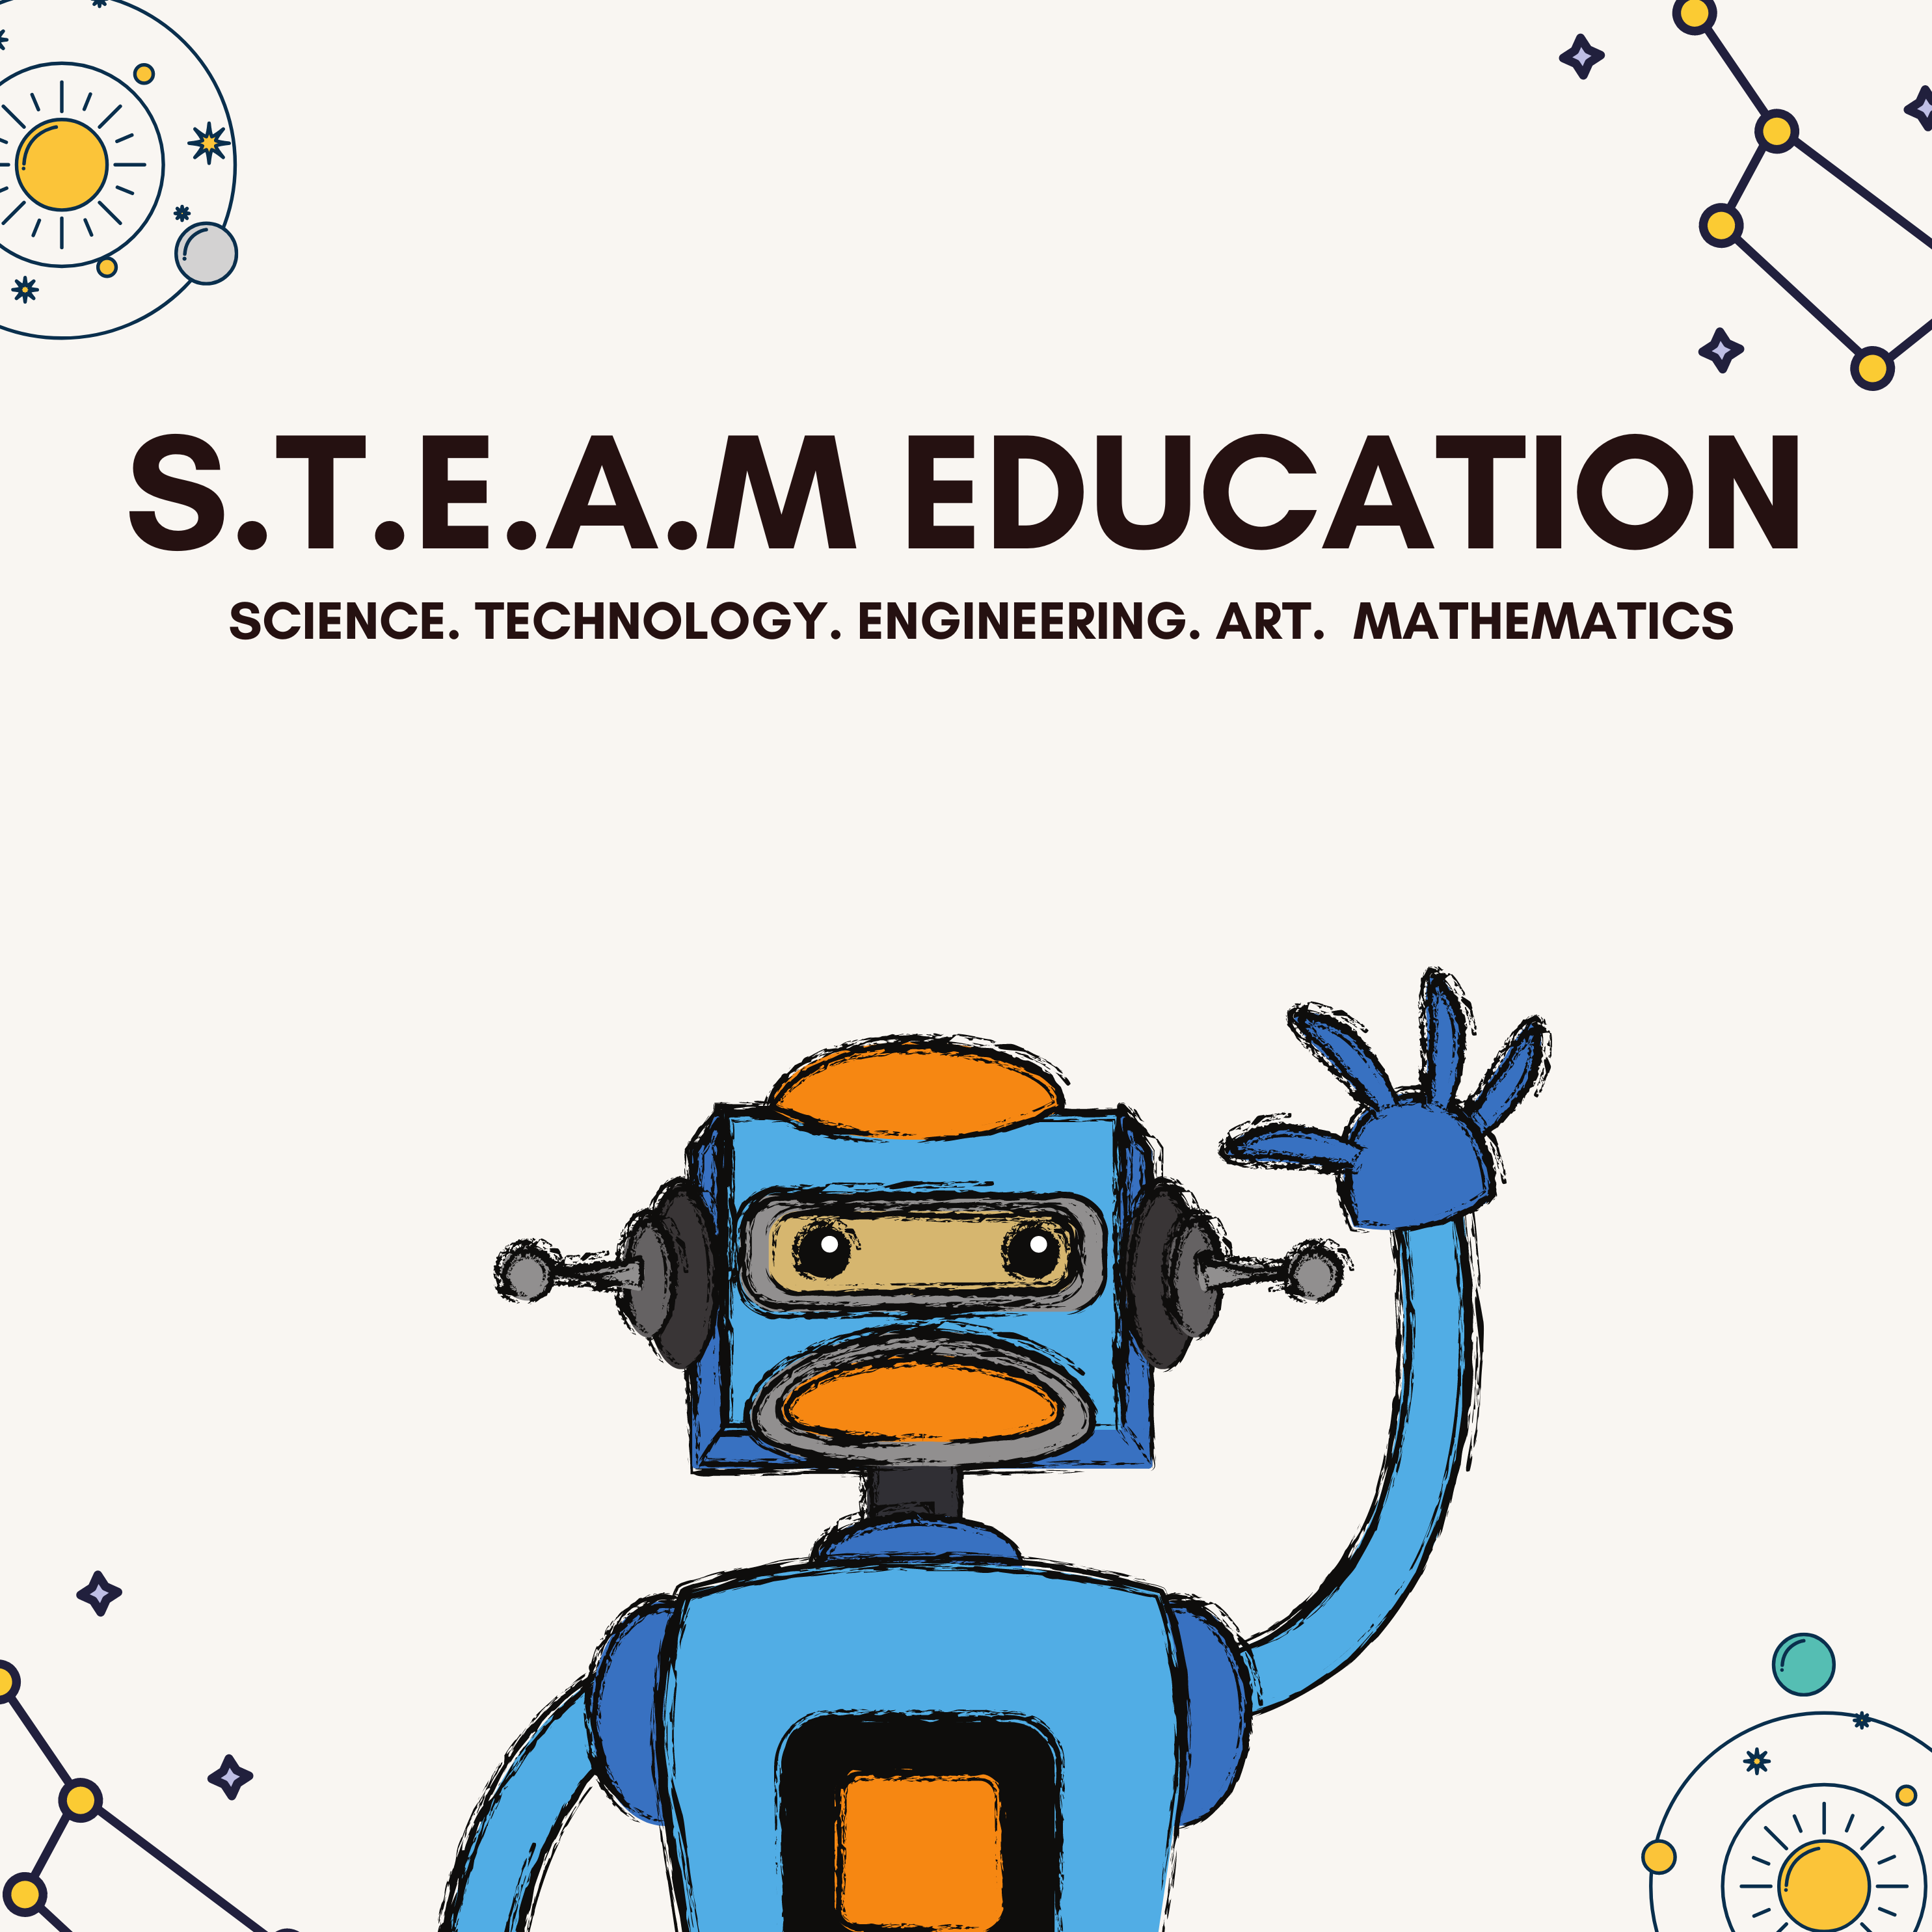 WHY S.T.E.A.M EDUCATION IS IMPORTANT